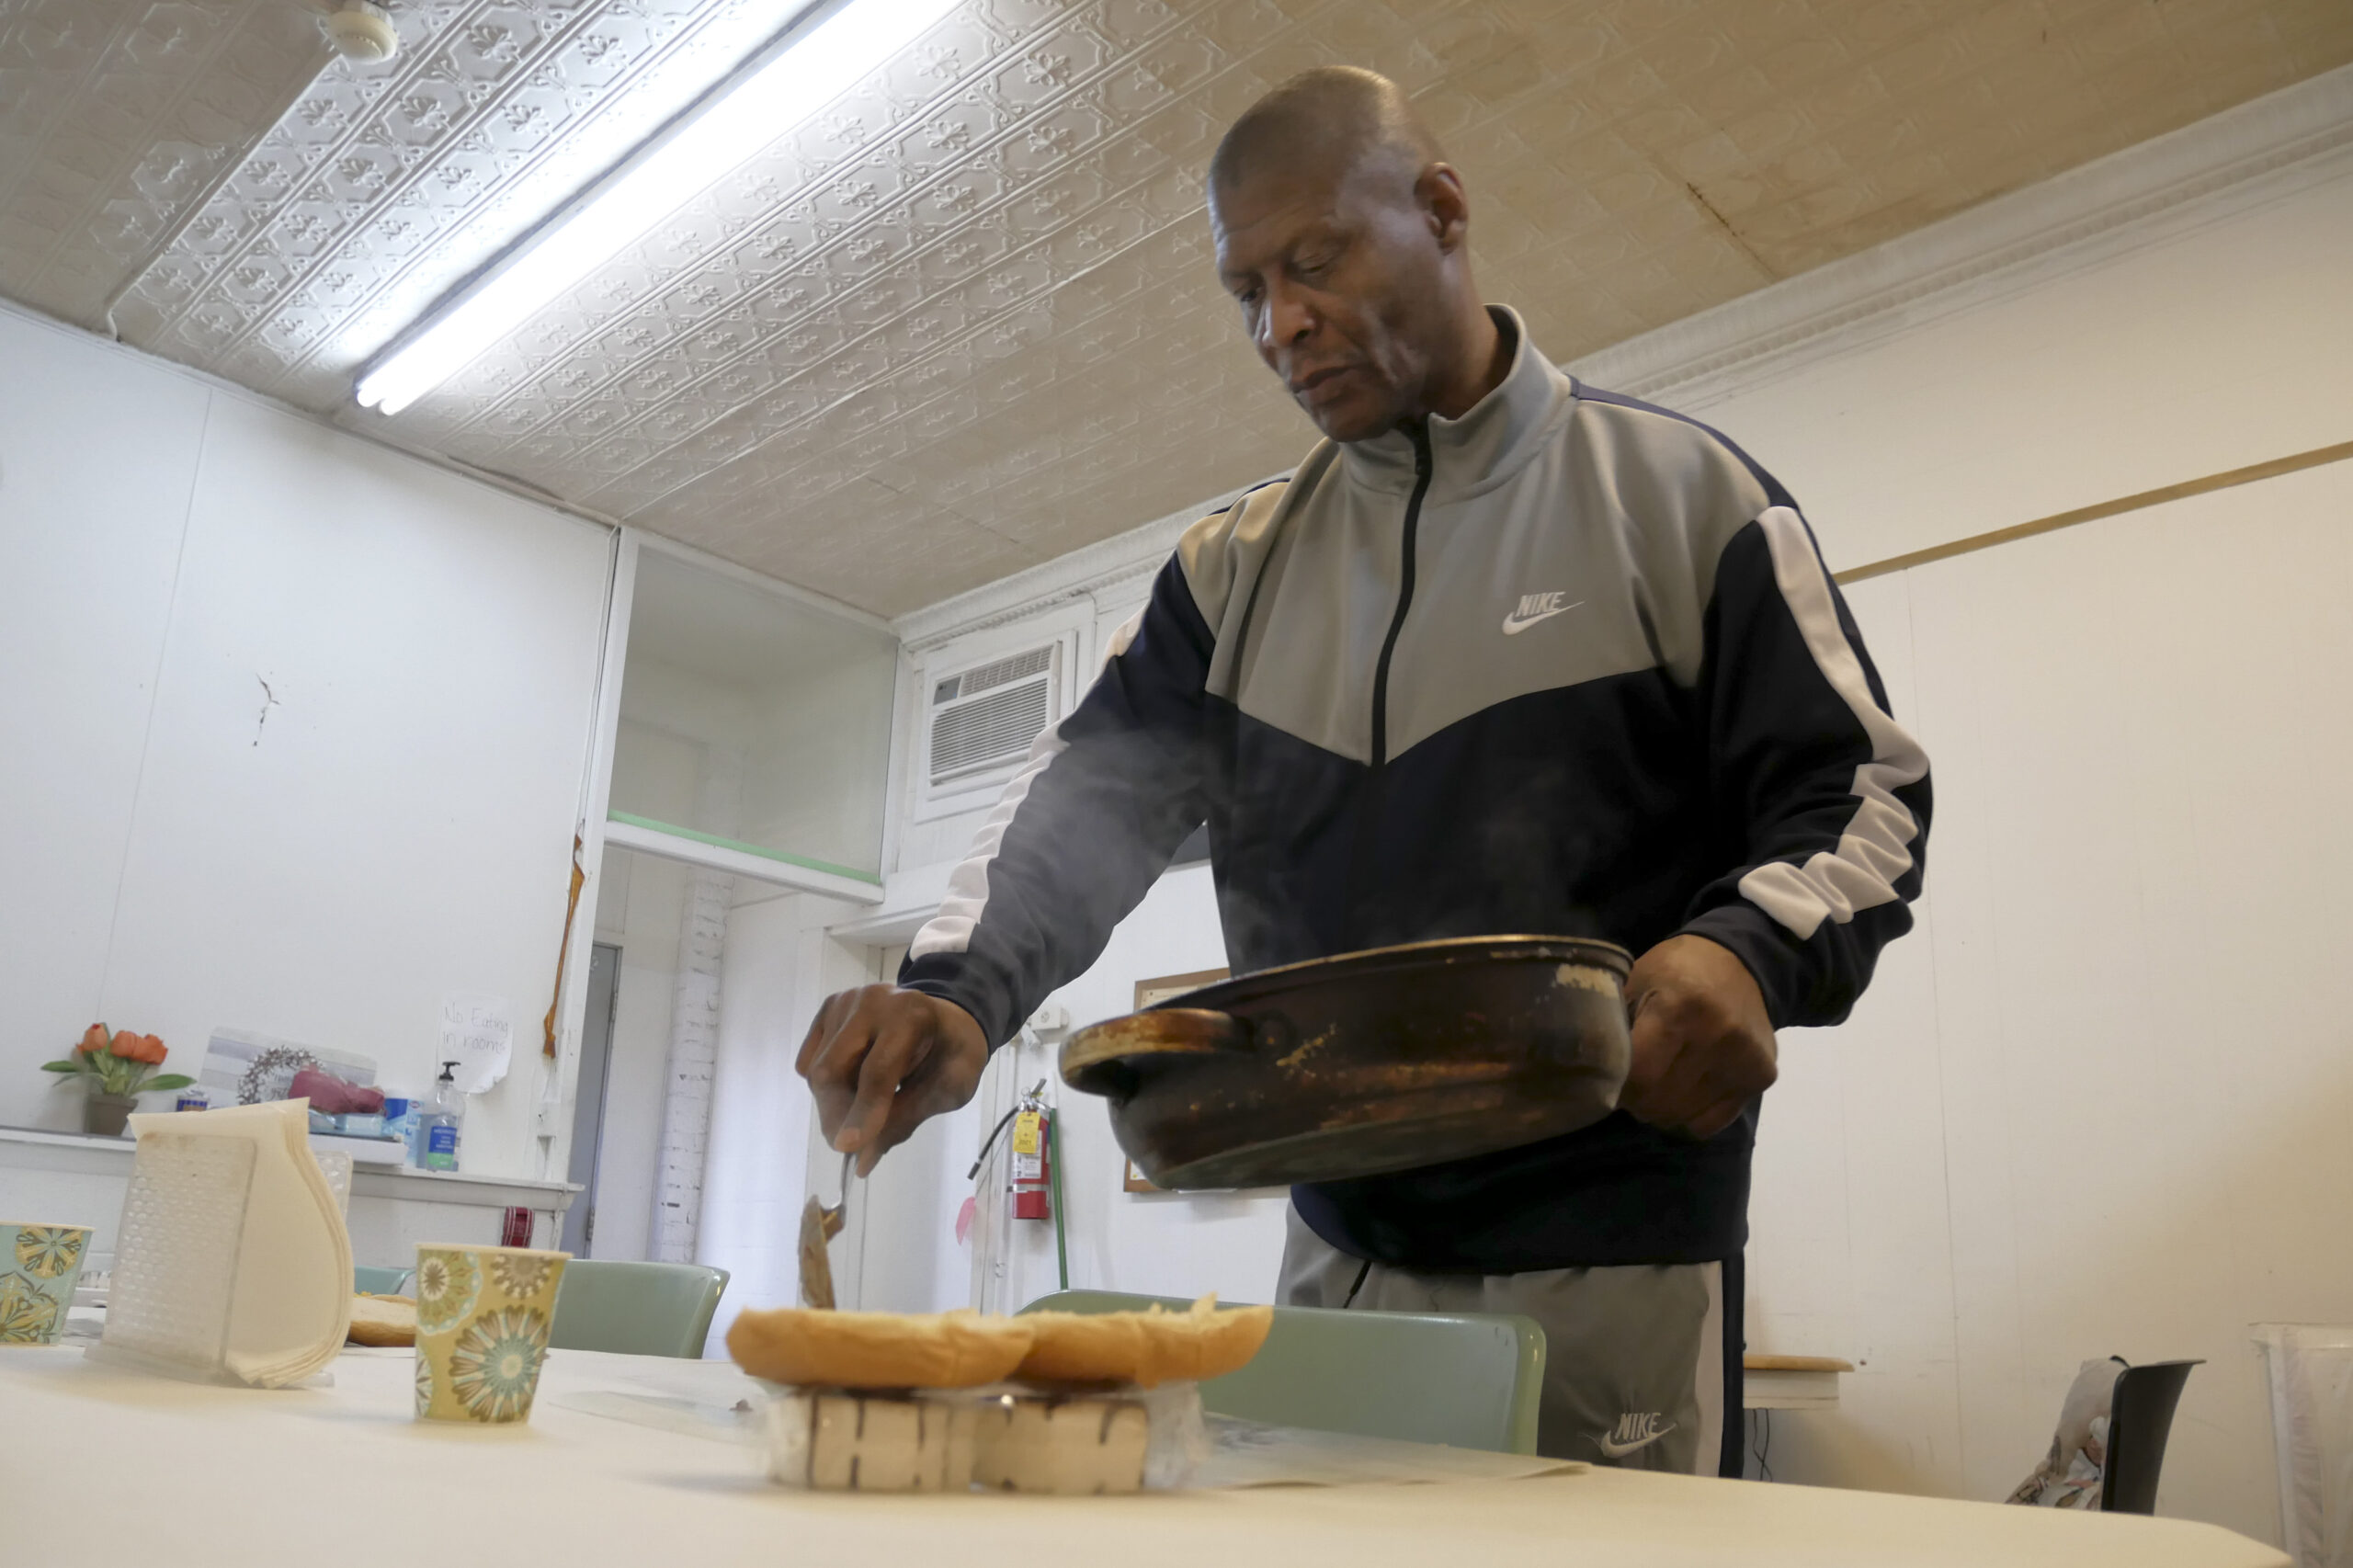 Tony Moore talks while preparing lunch for residents at his group home in Kenosha, Wis.